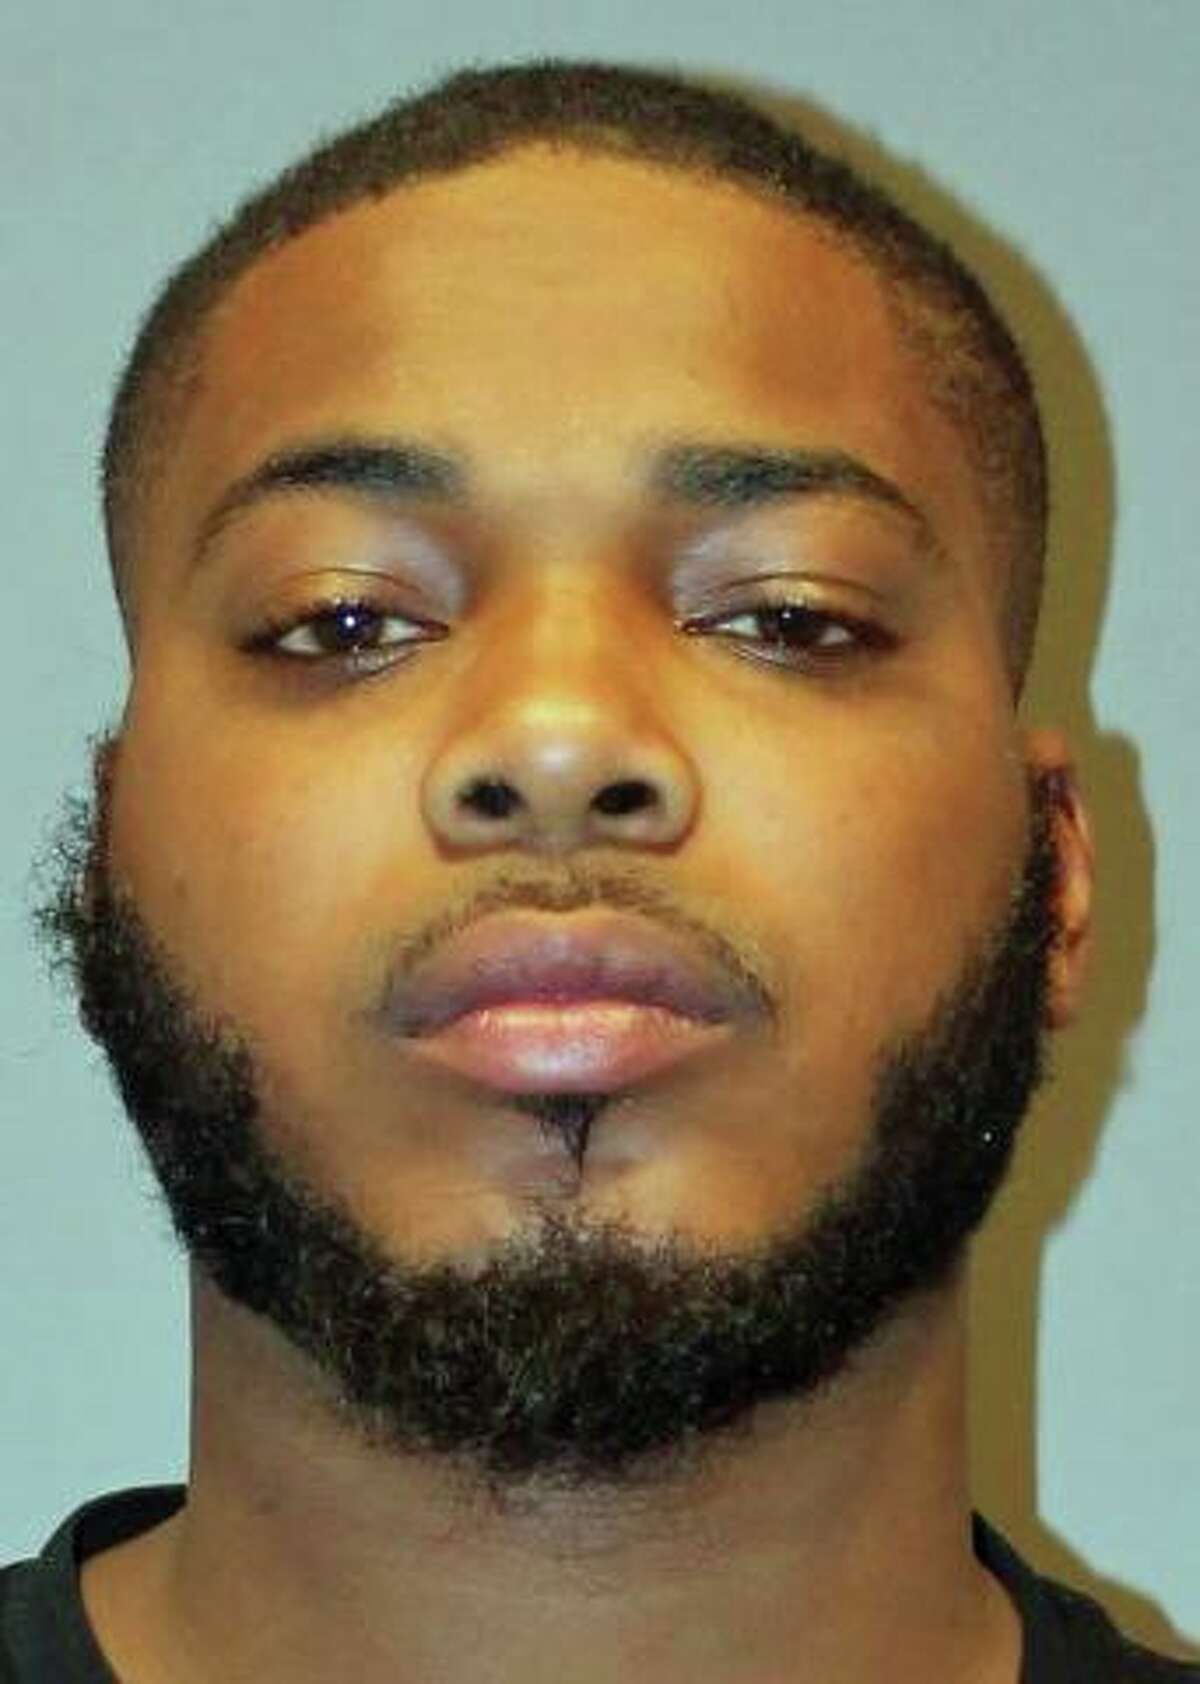 Jury selection begins Monday for Brandyn Ford, of Stratford, arrested in connection with the murder of Andre Pettway, 27, of Bridgeport, on Saturday, May 27, 2017.